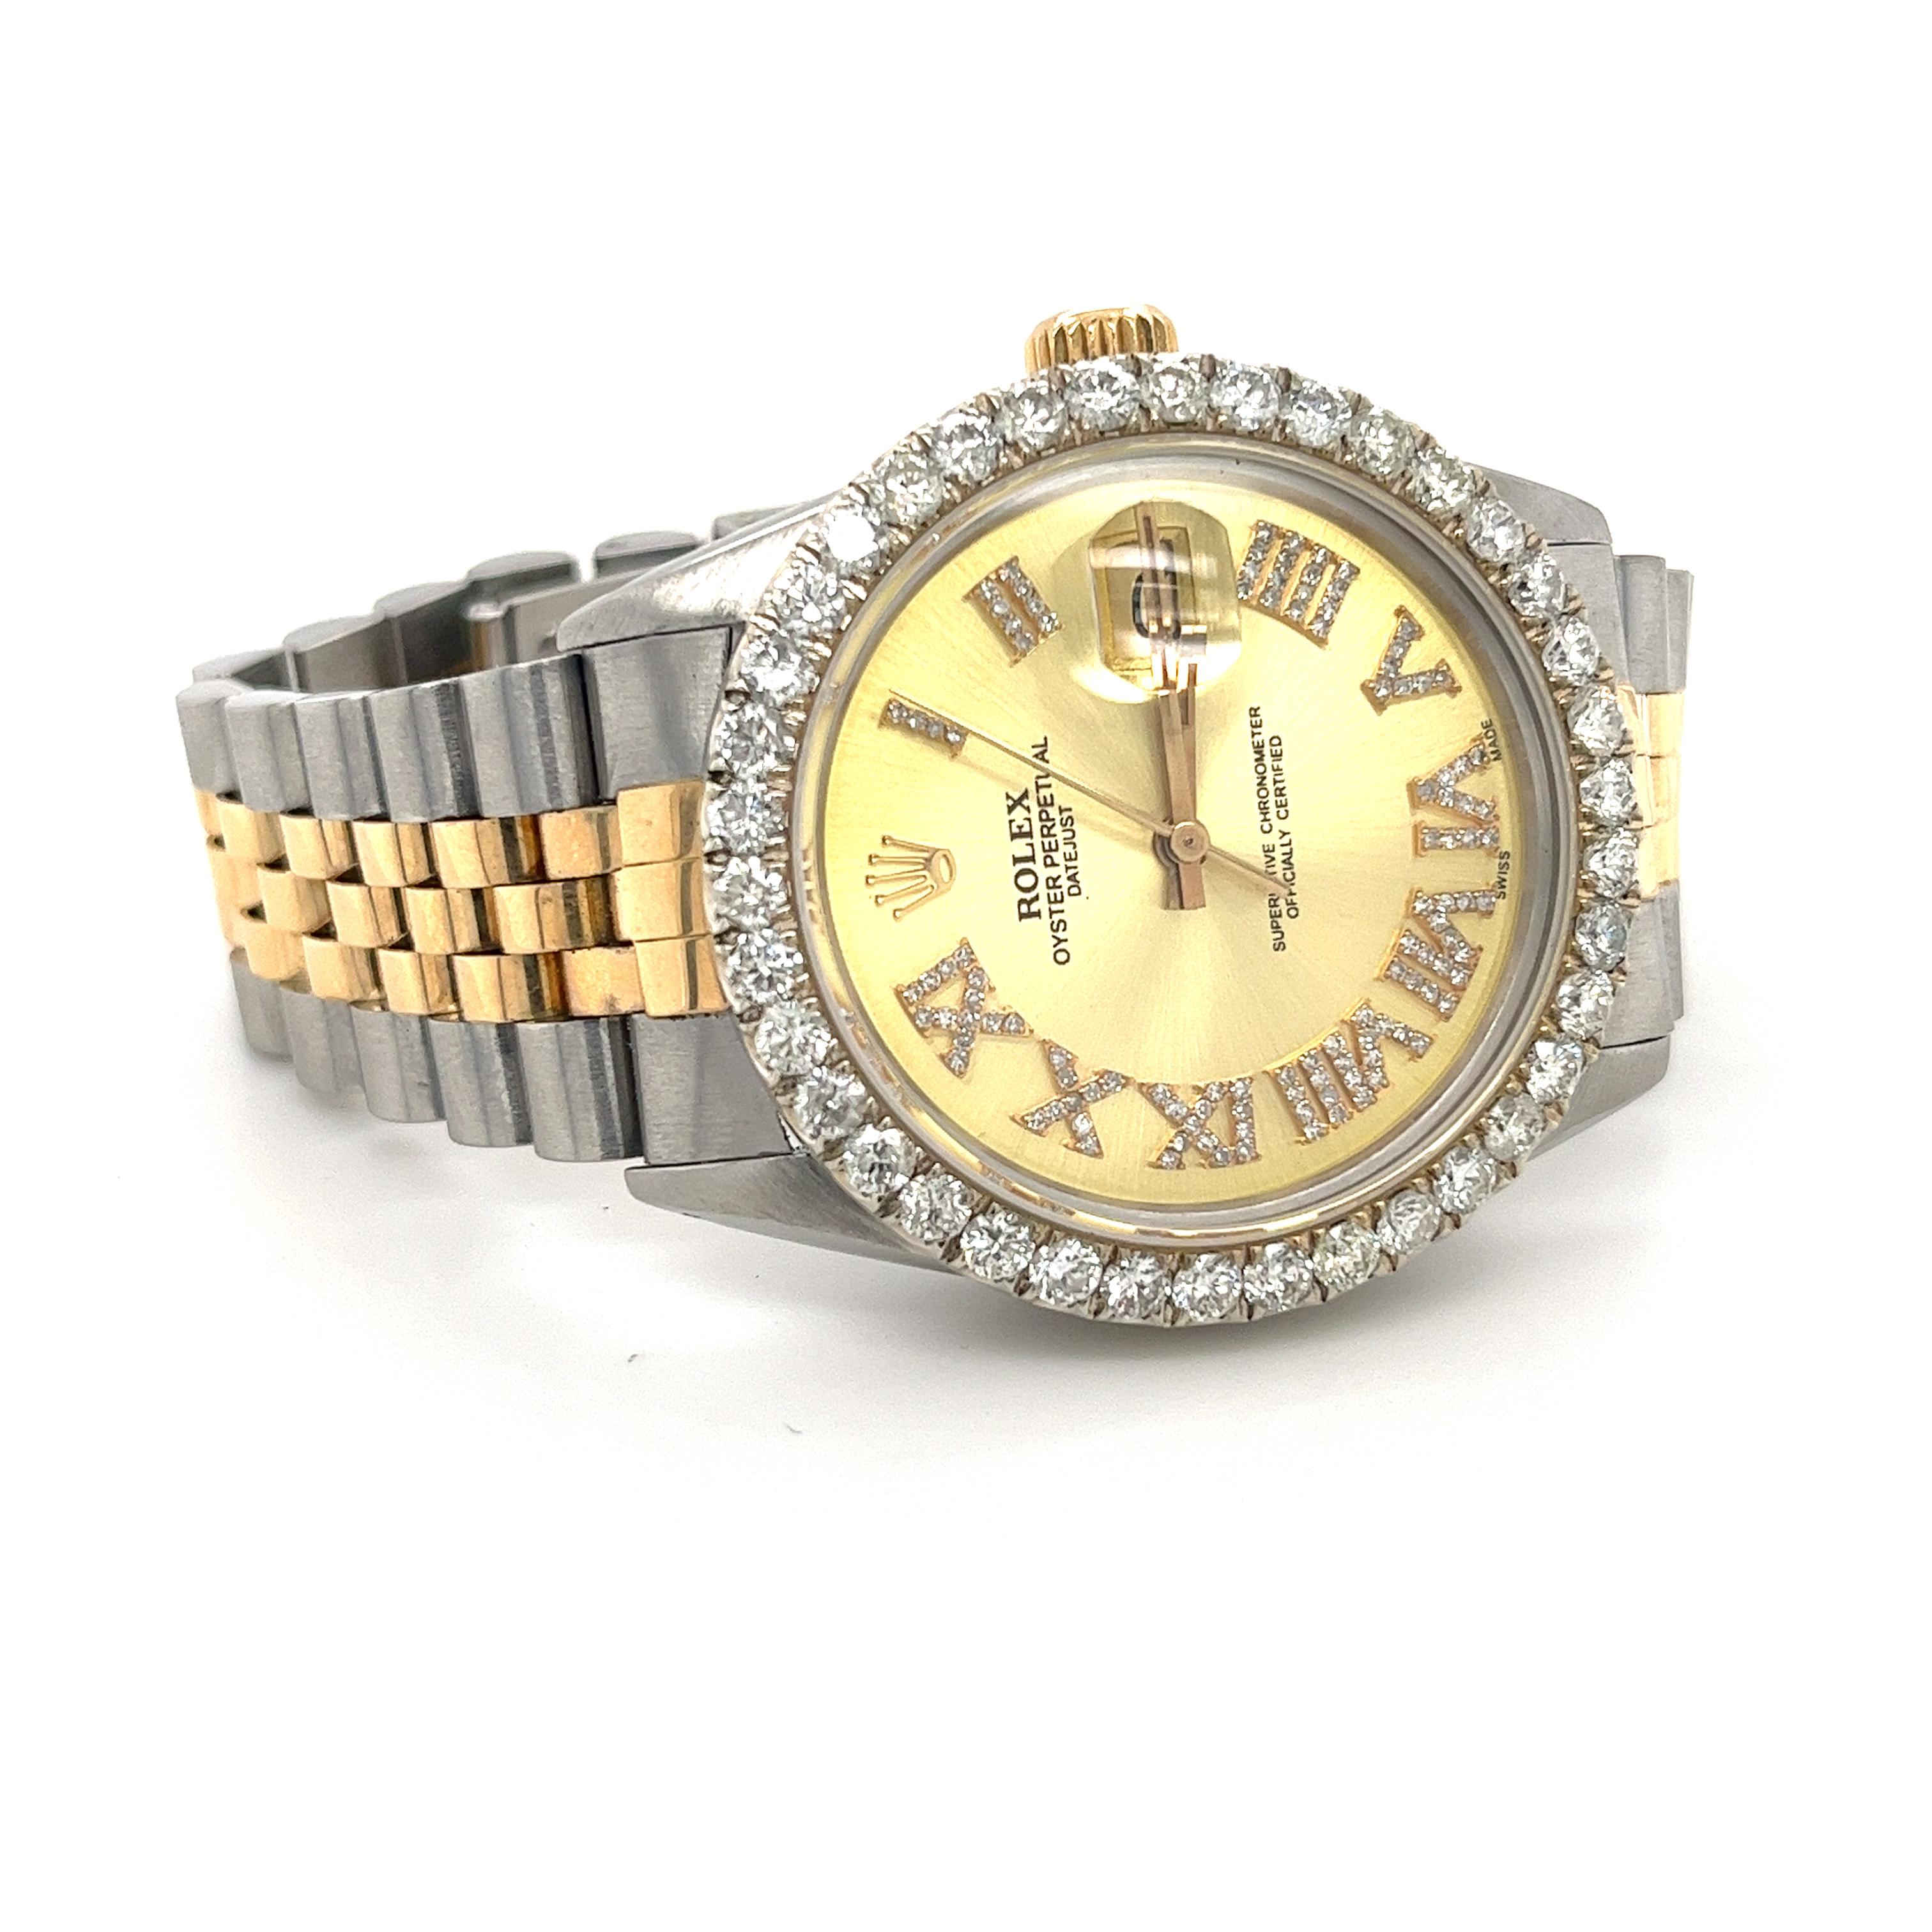 Rolex Datejust 16013 set with over 3 carats in natural round cut diamonds. Diamonds are set all around the bezel and on the Roman Numeral hour markers. Complemented with a two-tone jubilee strap and adjustable deployment clasp.

An extravagant, yet